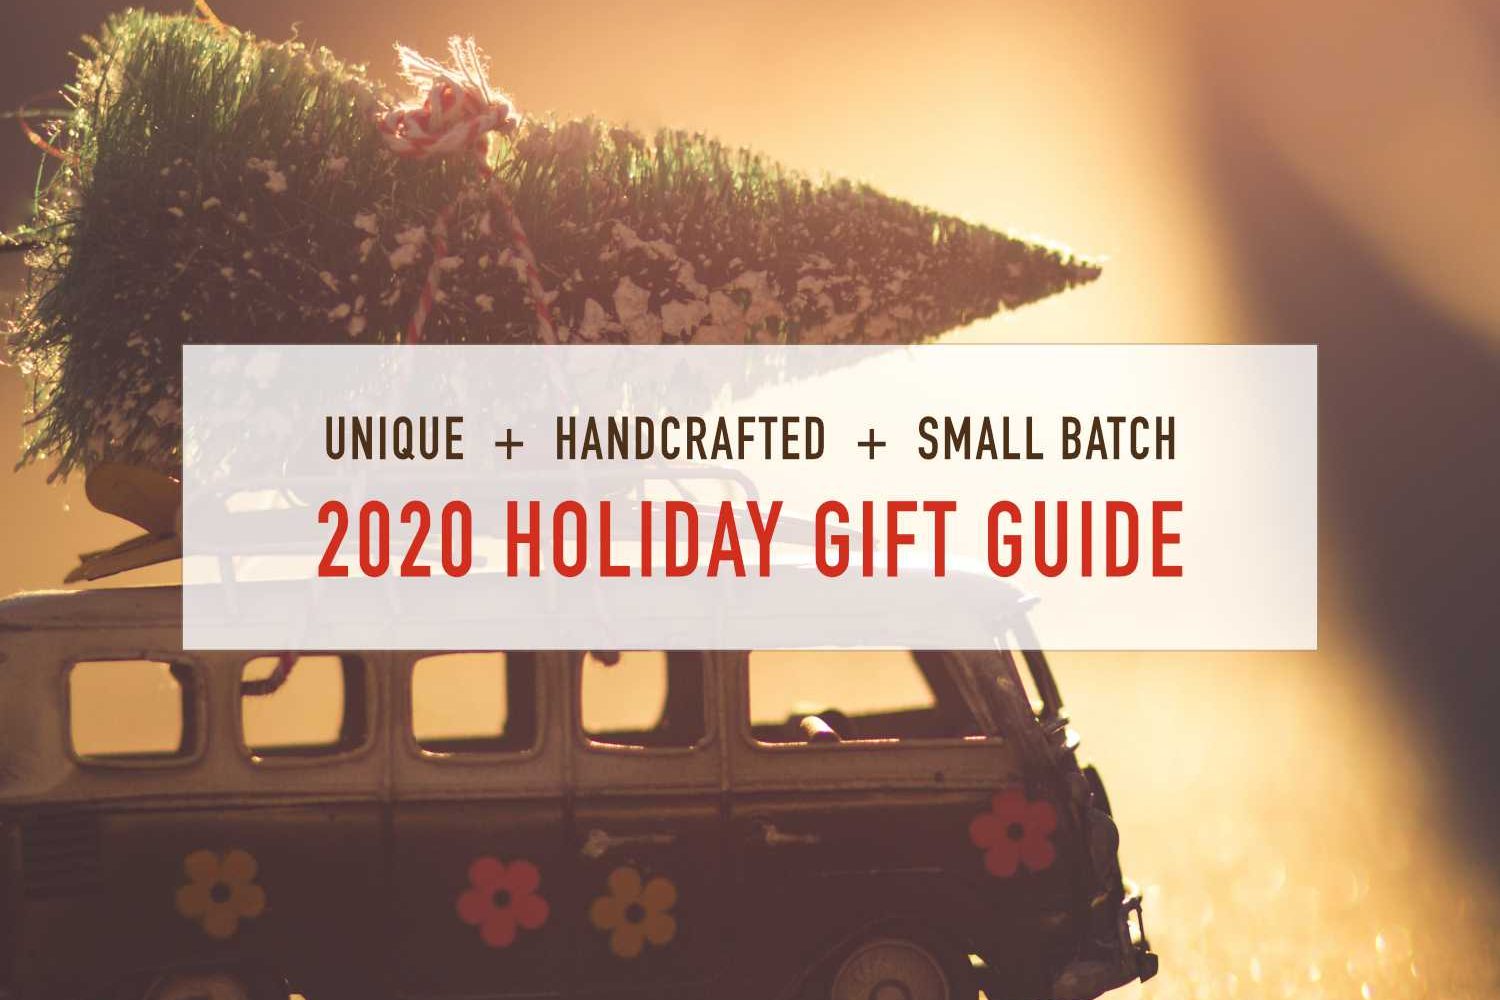 2020 Holiday Gift Guide for unique handmade handcrafted small batch gifts